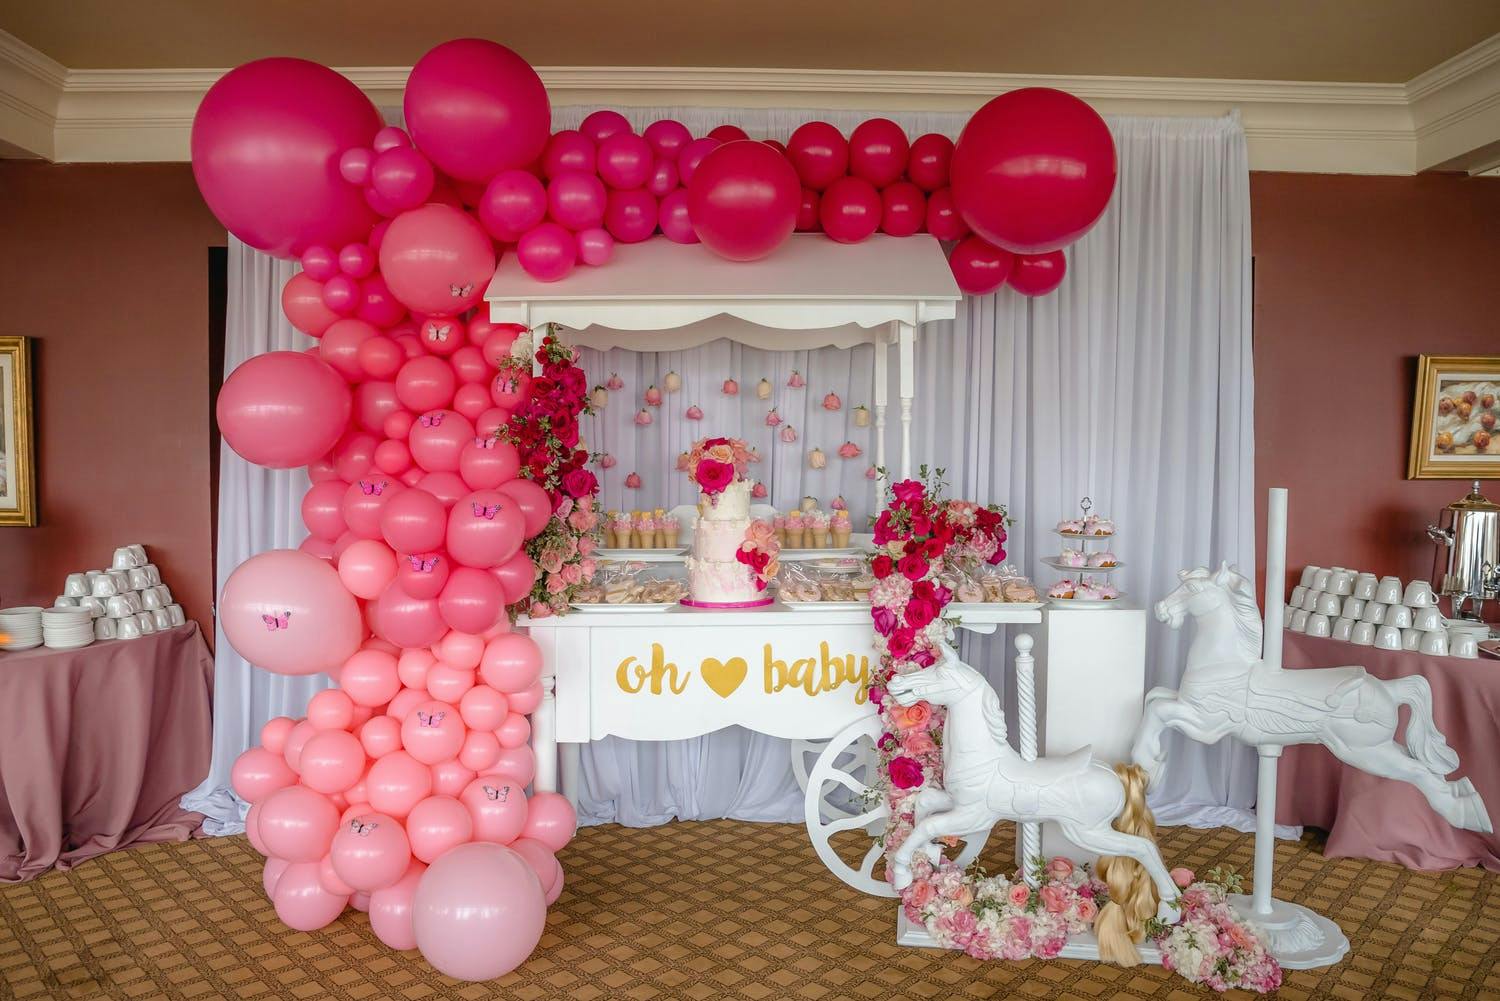 BabyShower With Dessert Station and Pink Balloon Installation | PartySlate